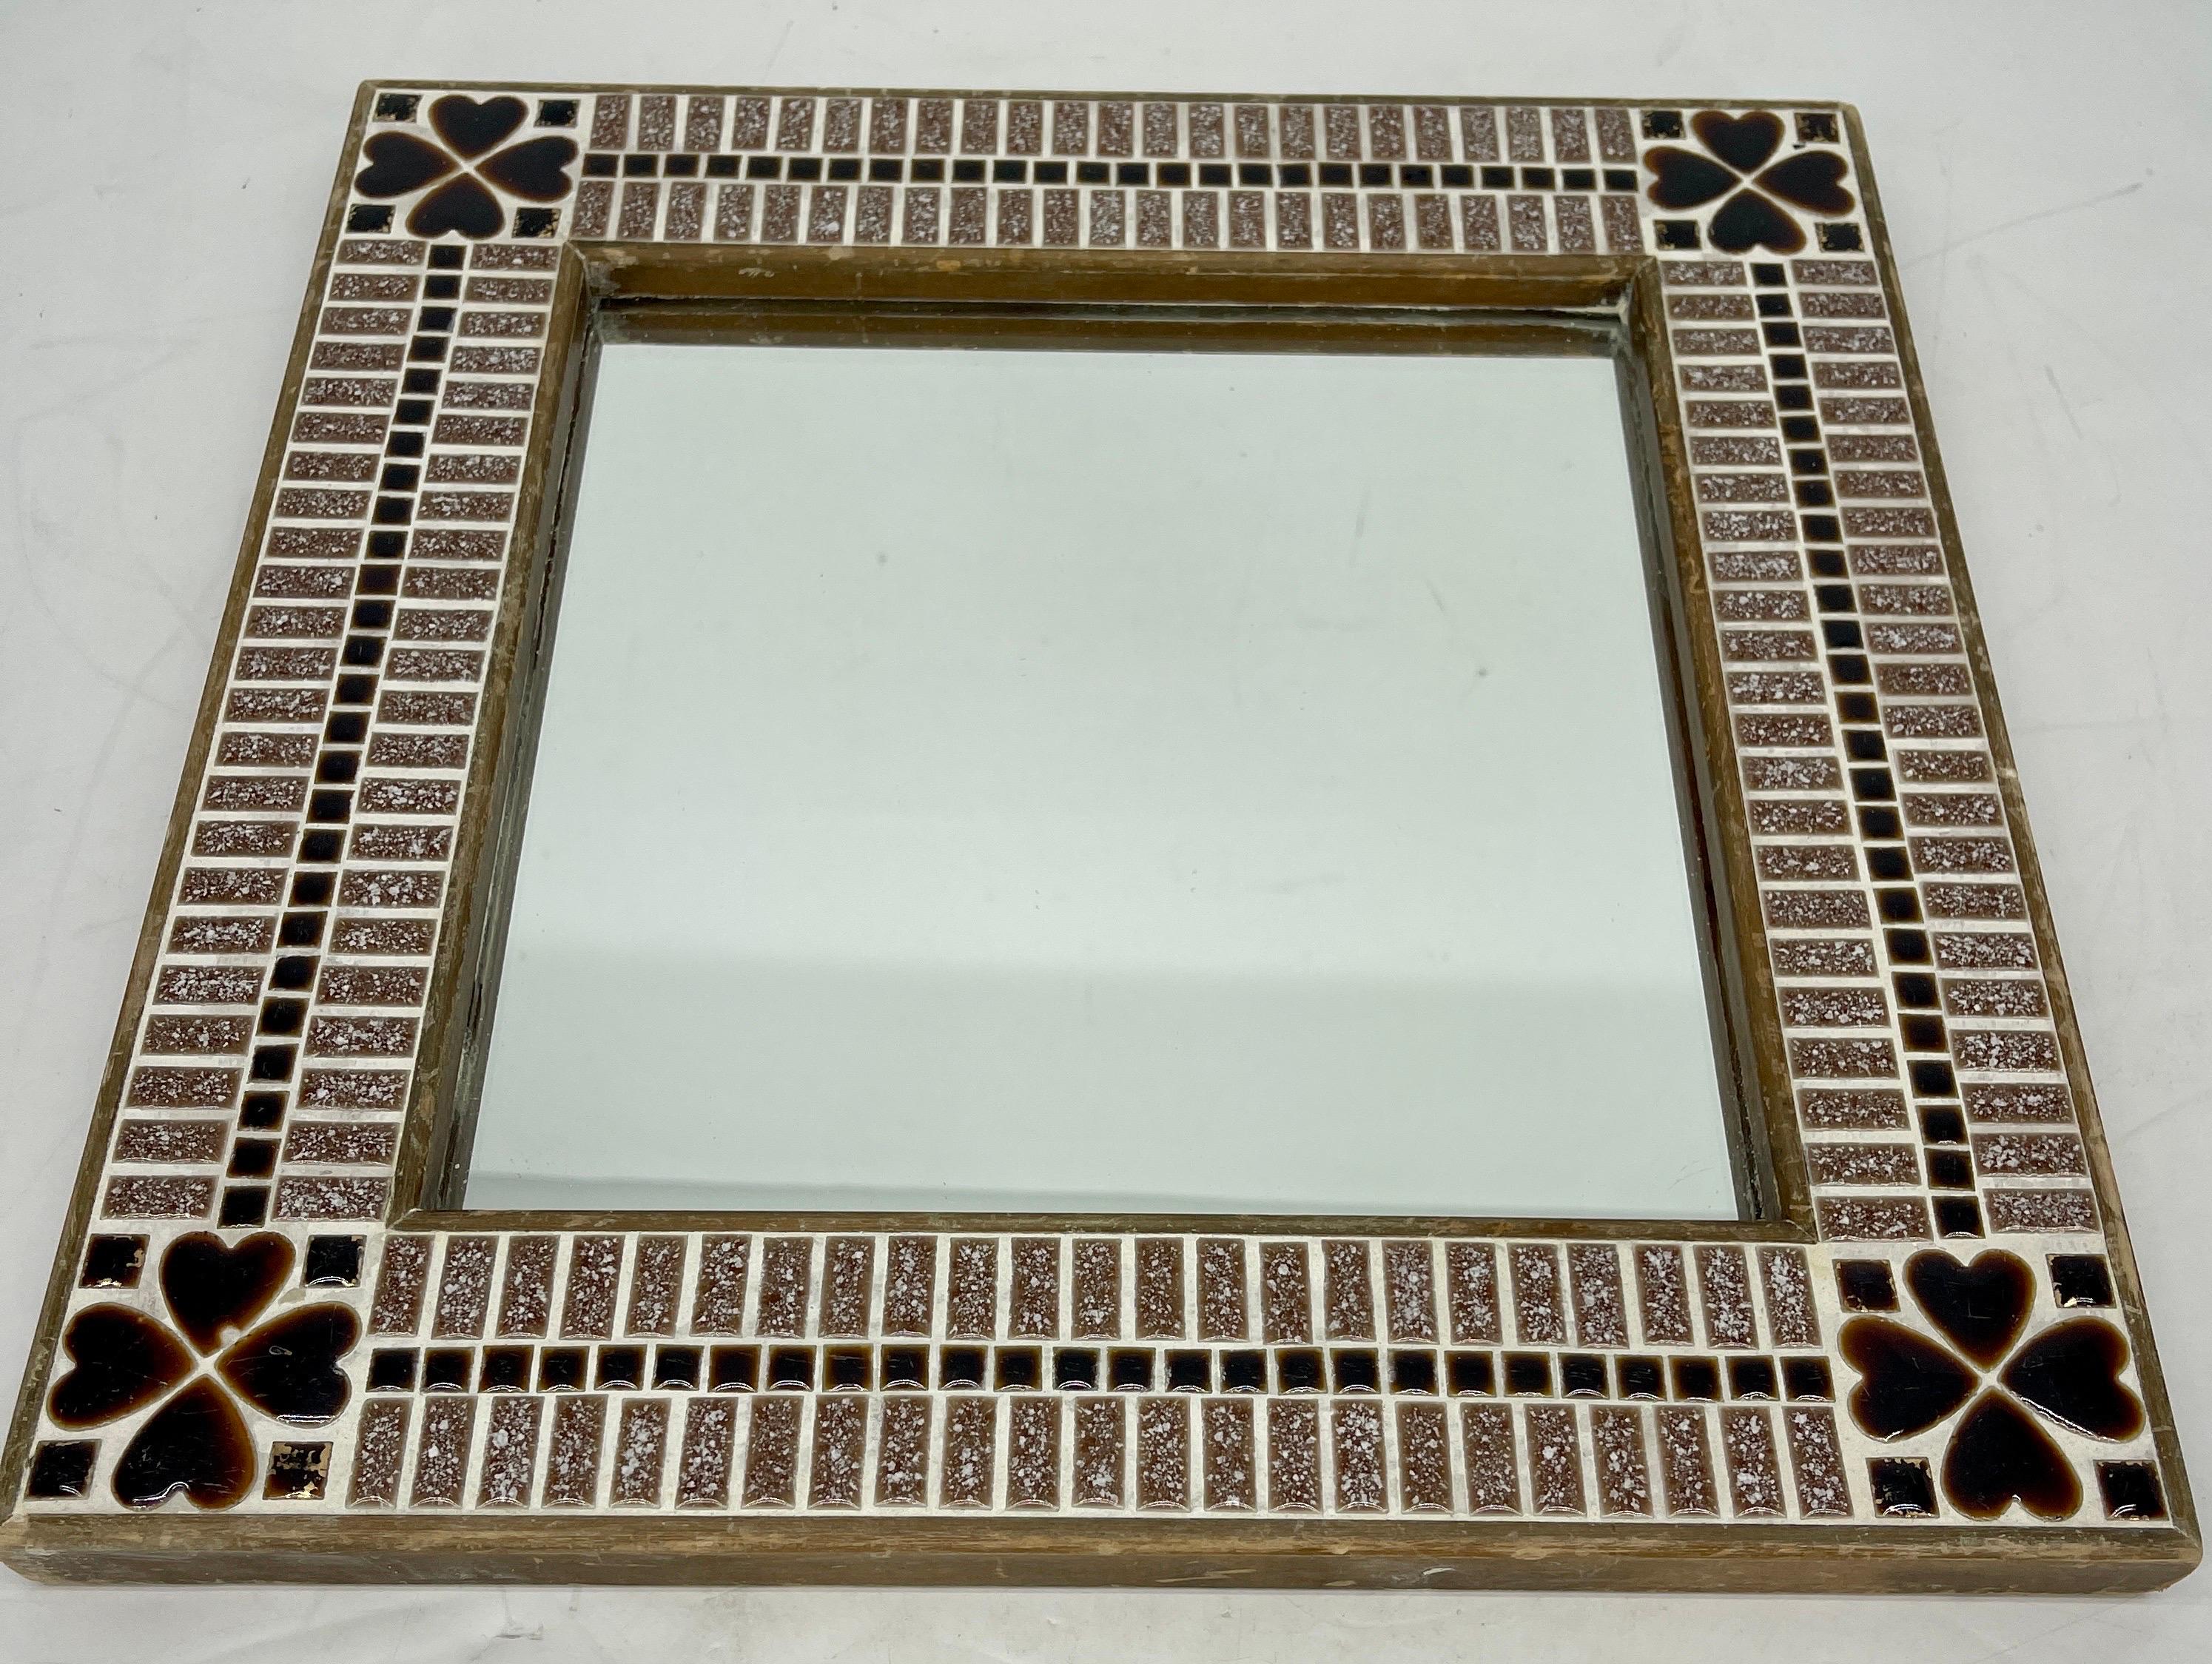 20th Century Small Square Tile Mirror with Heart Decorations For Sale